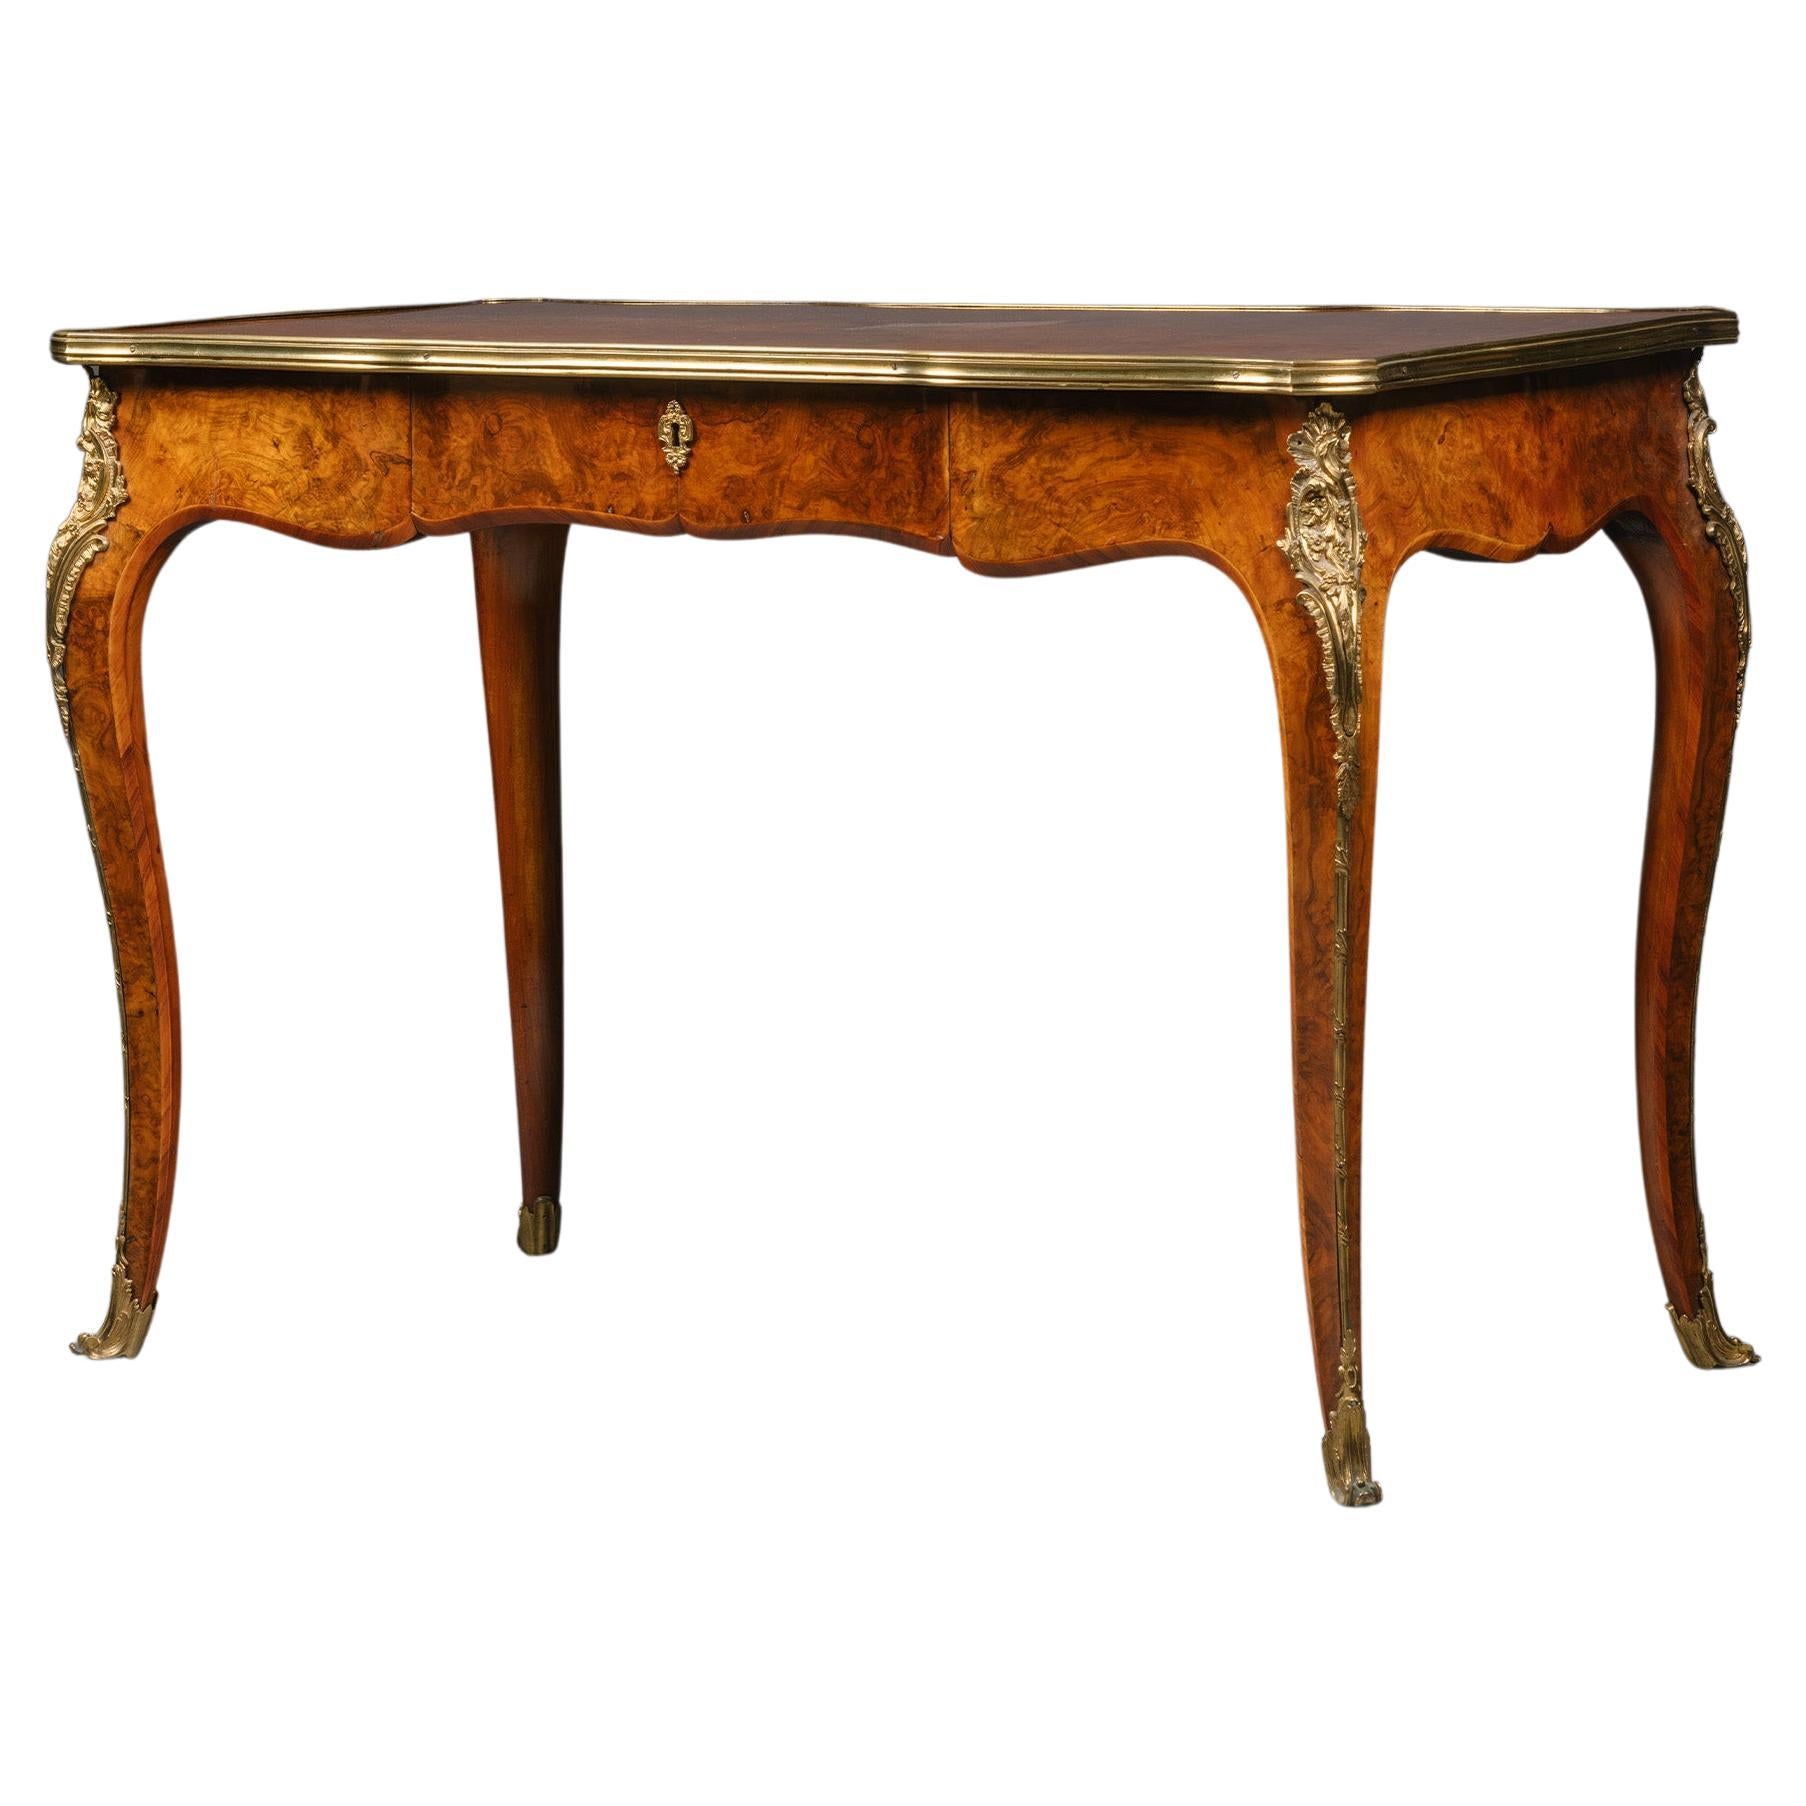 Gilt-Bronze Mounted Burr Walnut Writing Table, Probably by Gillows